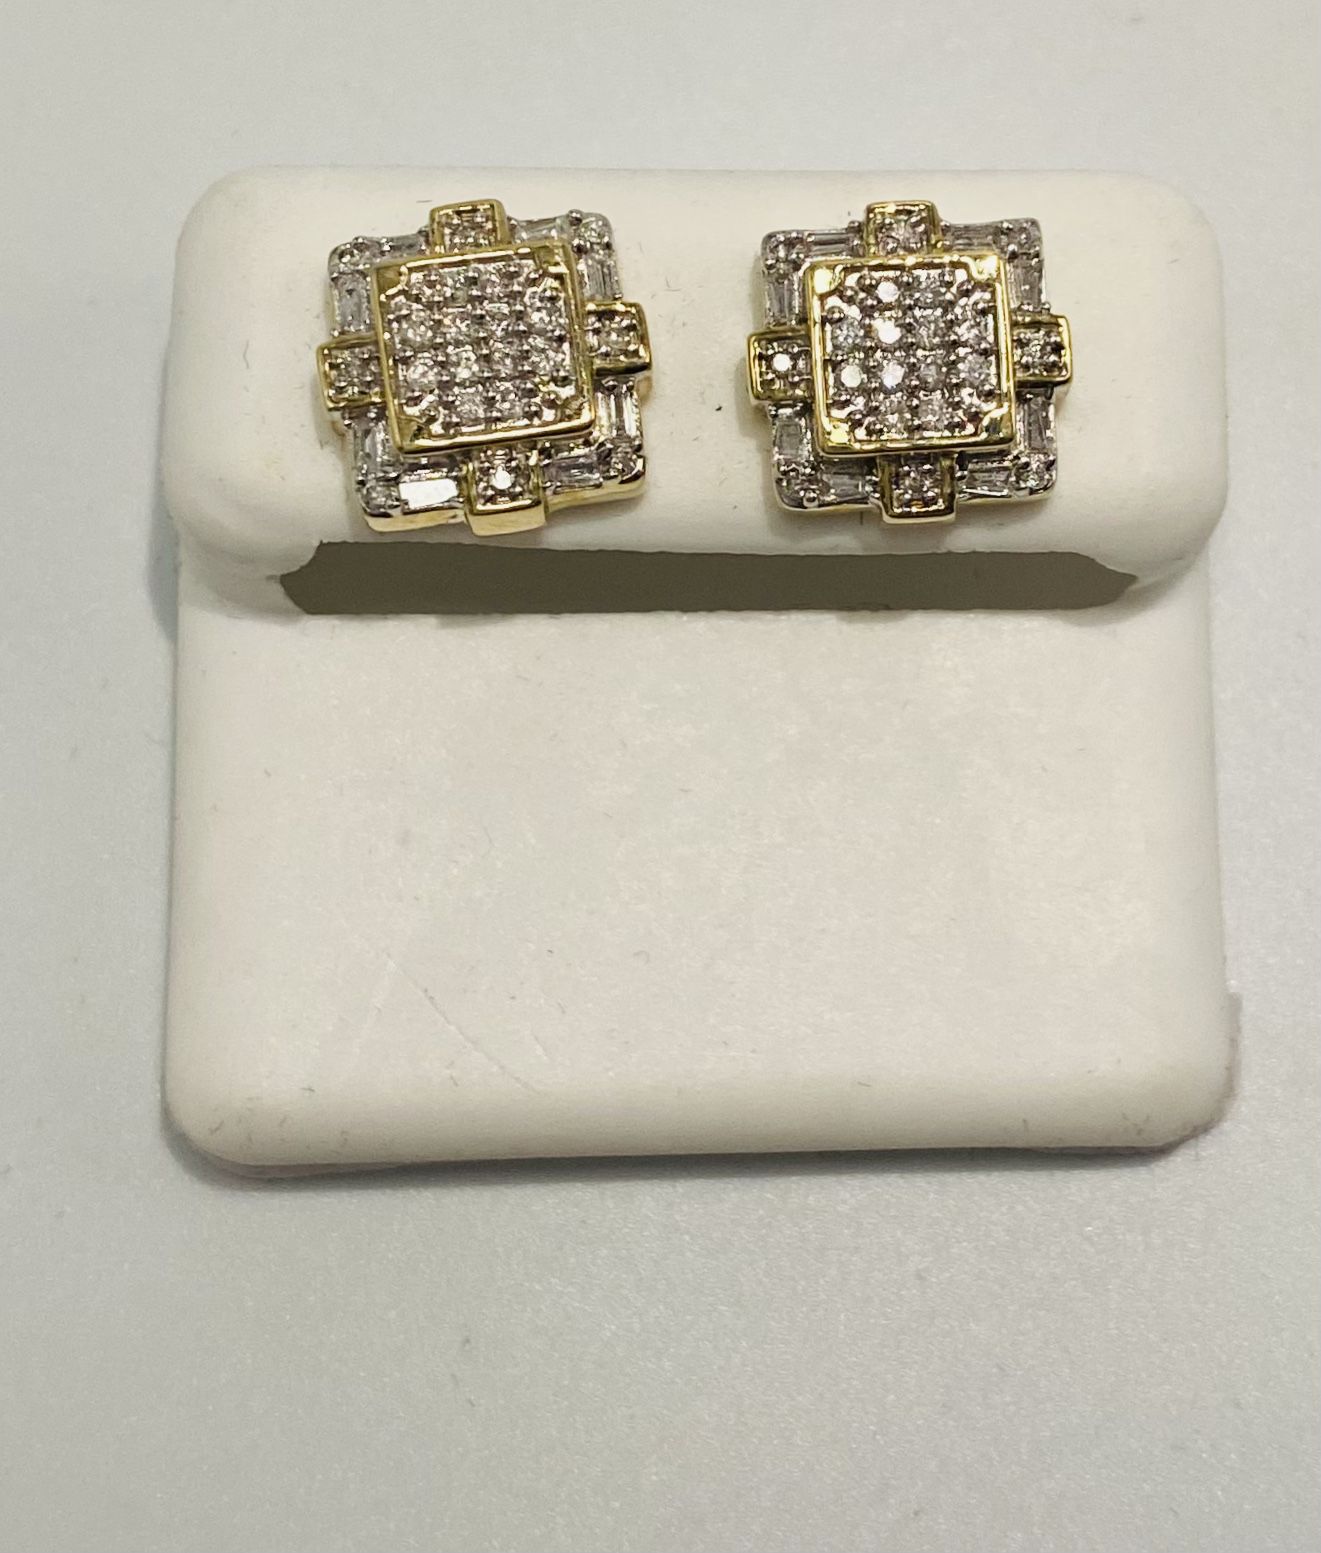 10kt Gold And Diamond Earrings Available On Special Sale